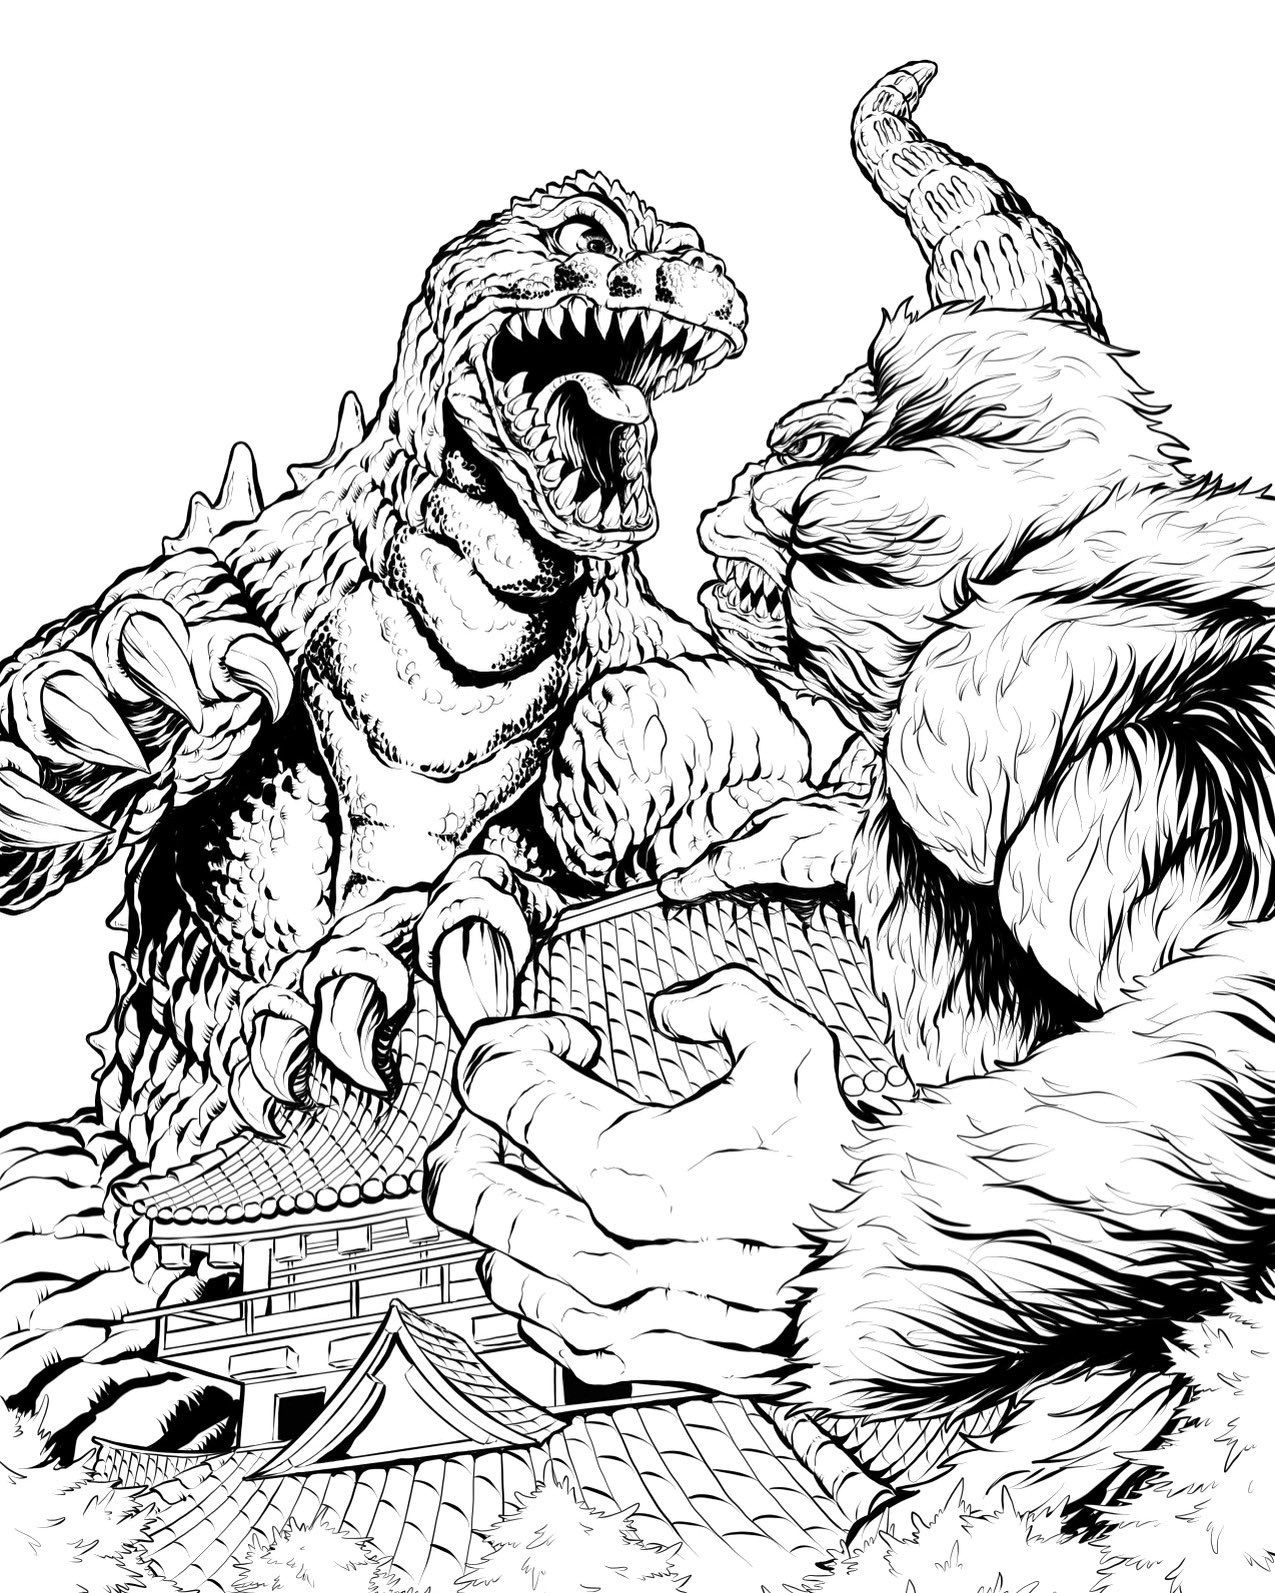 Thomartz october ms open on x king kong vs godzilla lineart campy wholesome entertaining redraw of an older piece so im excited for this one wip lineart godzilla kingkong monstermarch kaiju monster